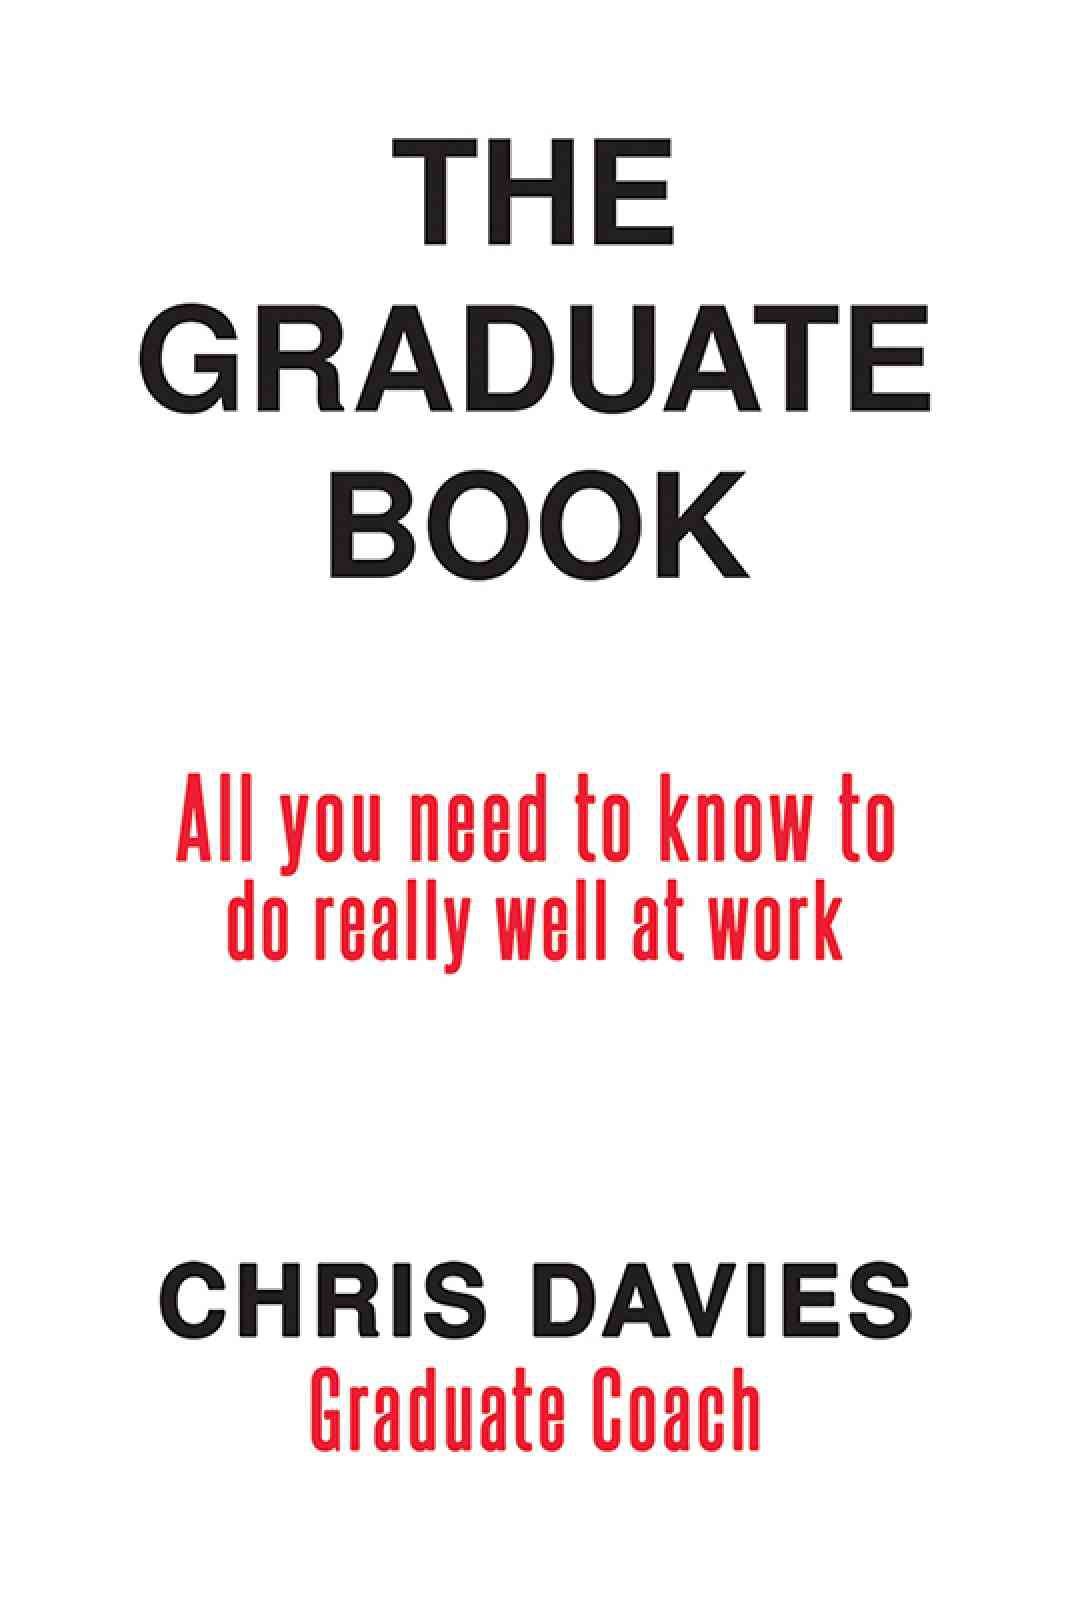 Peteblok YouTube Channel Featured ‘The Graduate Book’ & ‘The Student Book’